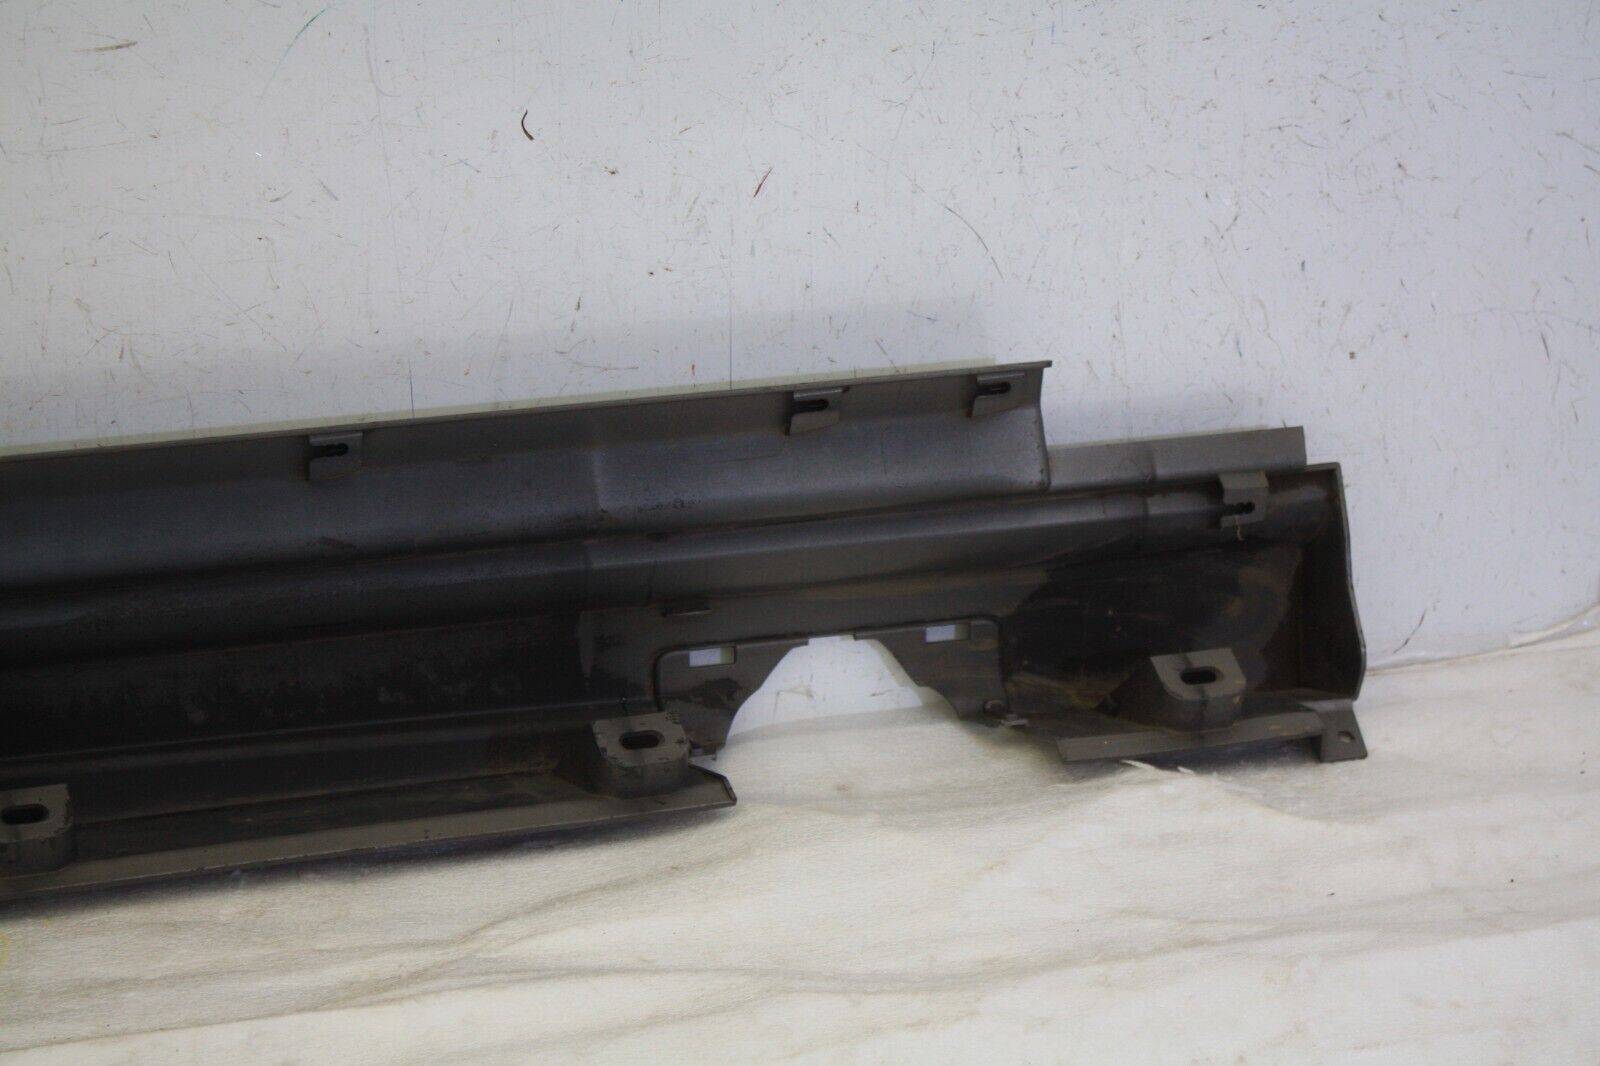 Range-Rover-Autobiography-Left-Side-Skirt-2009-TO-2012-BH4M-200B09-A-Genuine-176217123655-14